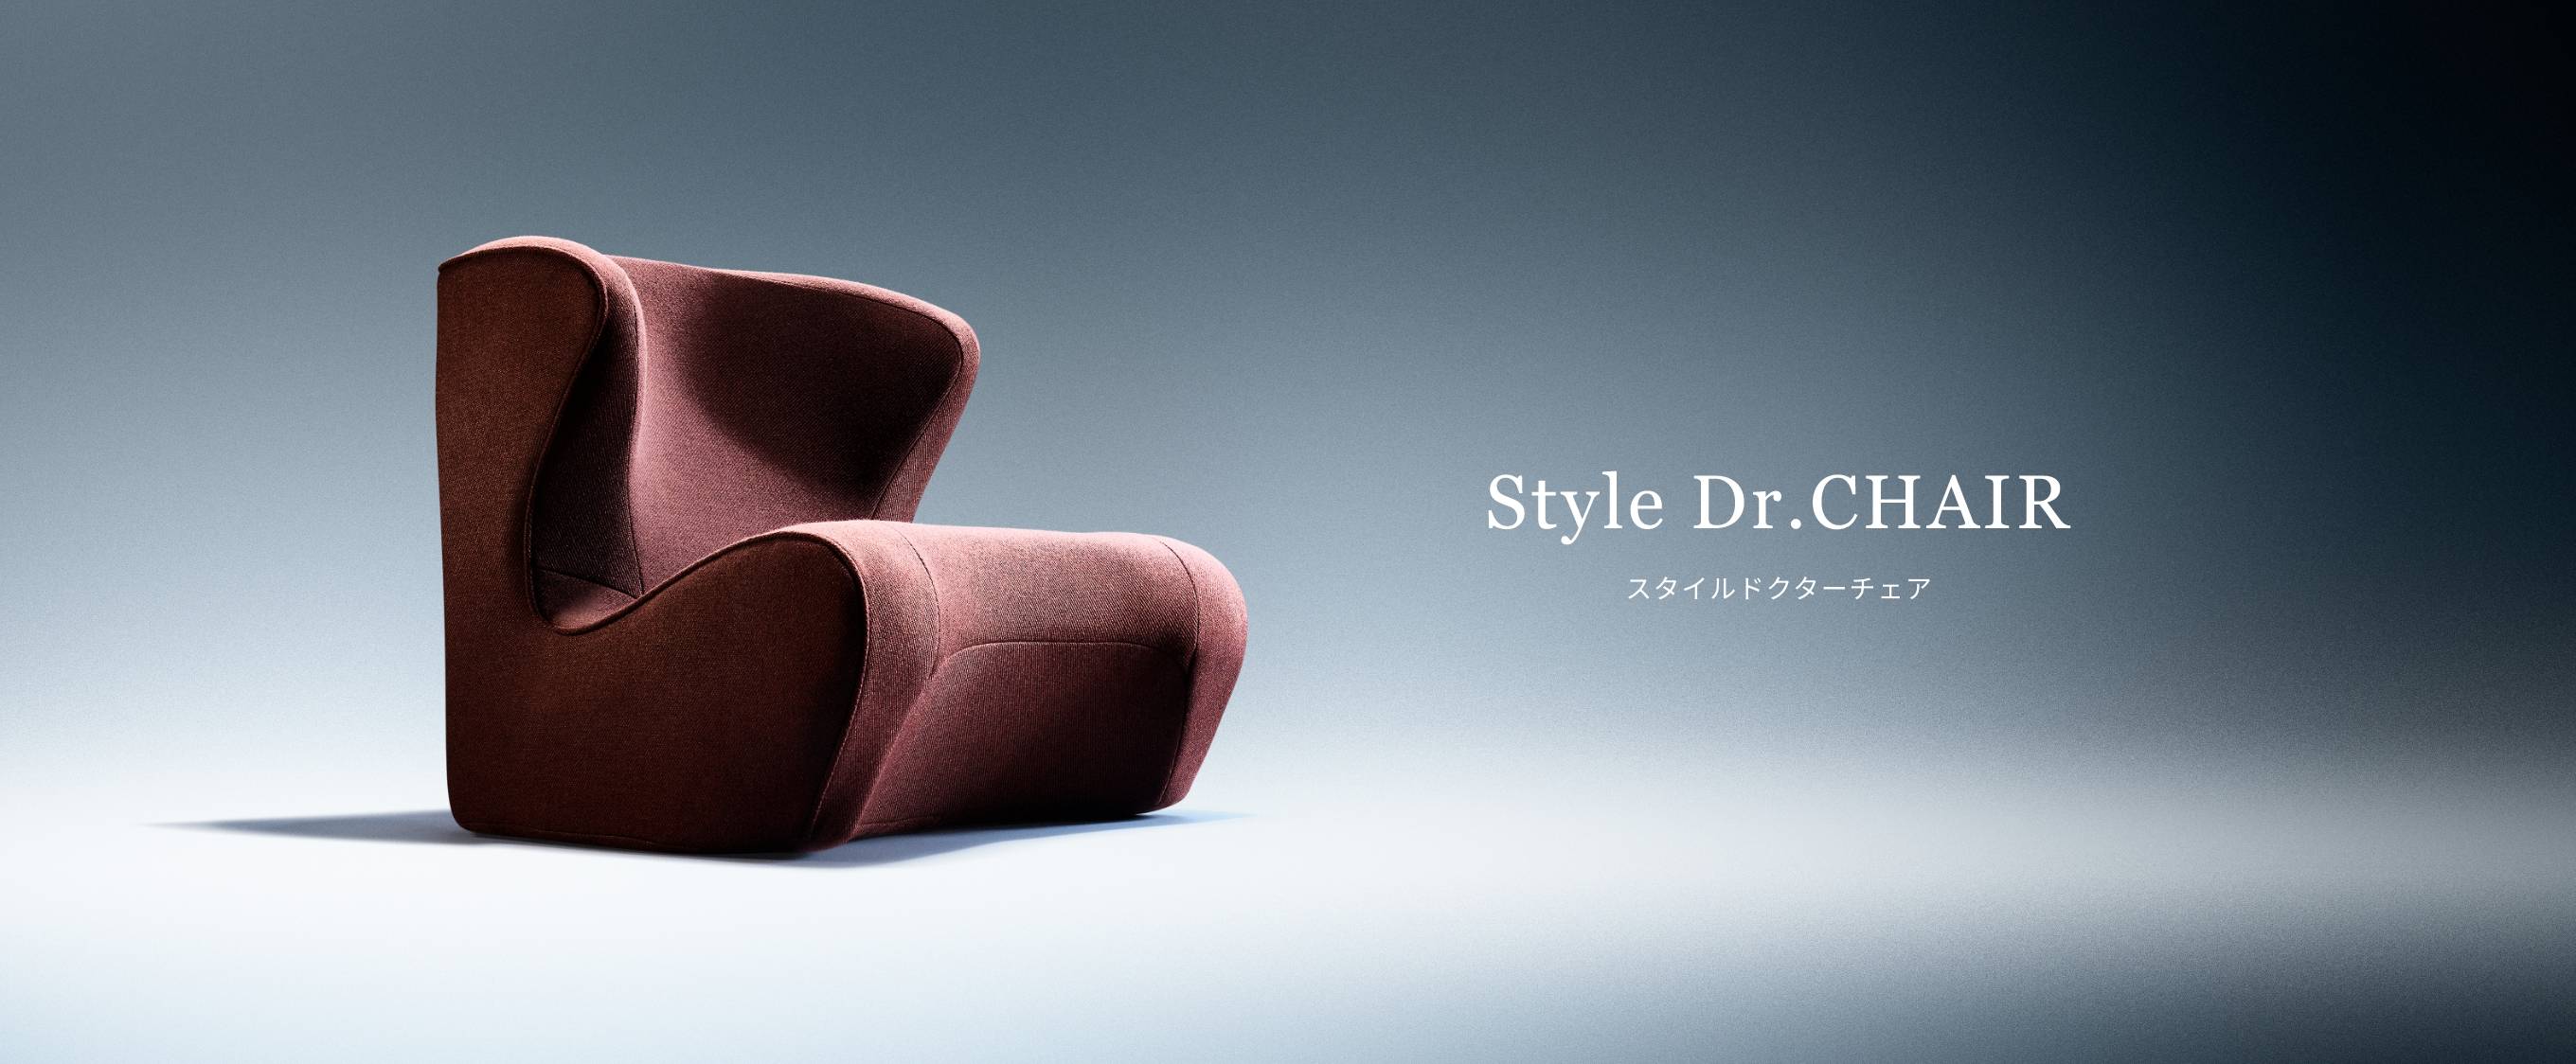 Style Dr.CHAIR（スタイルドクターチェア） | Style | BRANDS 